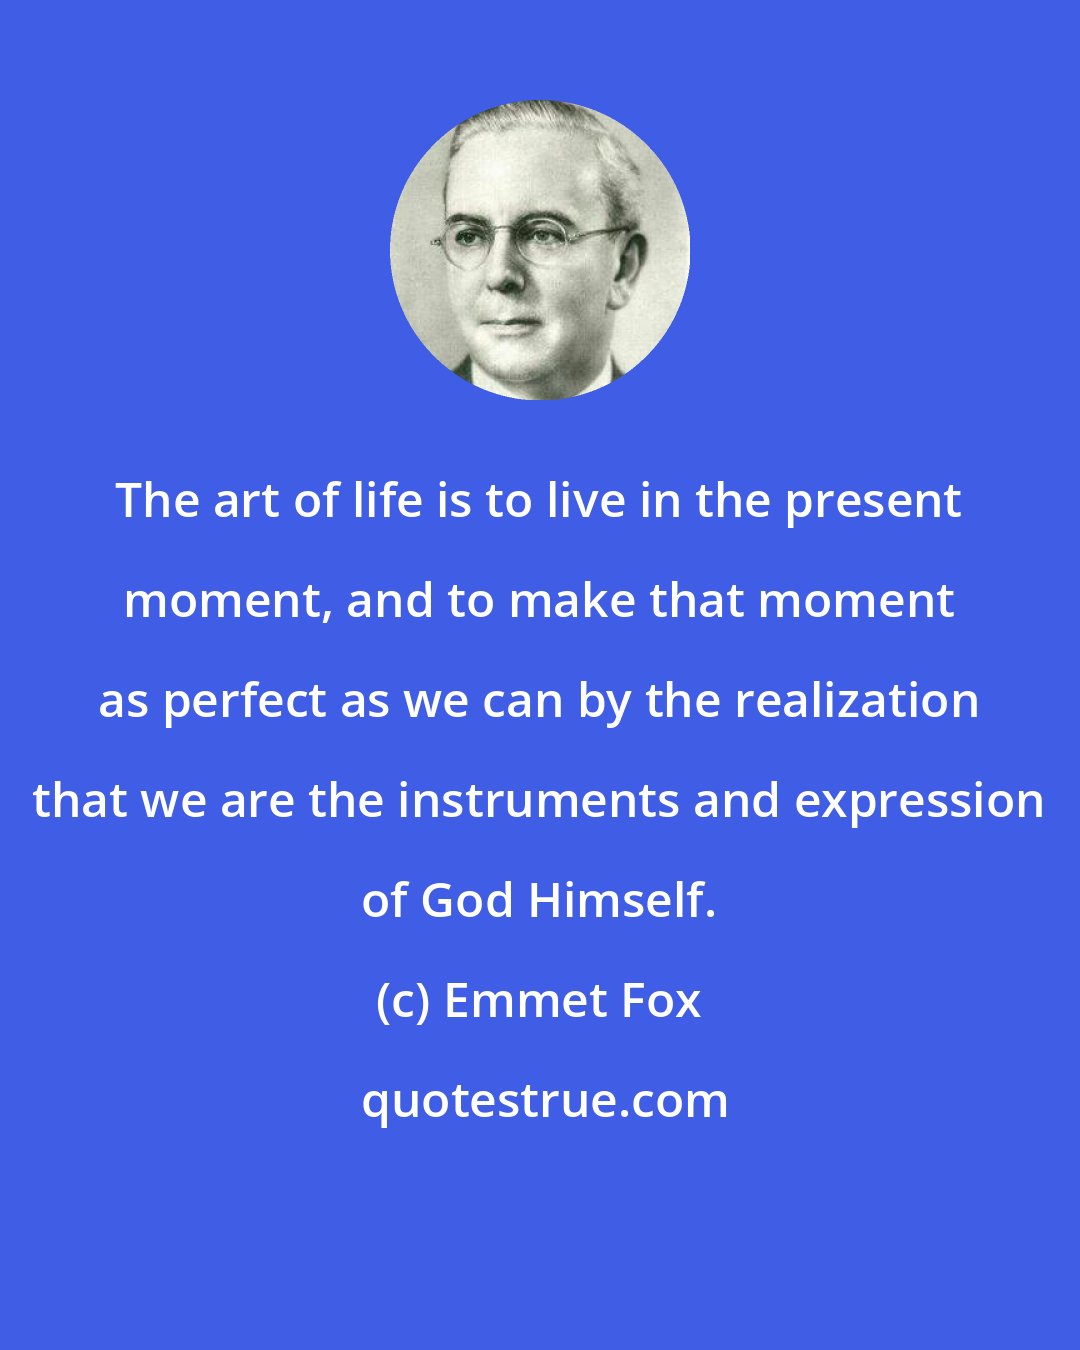 Emmet Fox: The art of life is to live in the present moment, and to make that moment as perfect as we can by the realization that we are the instruments and expression of God Himself.